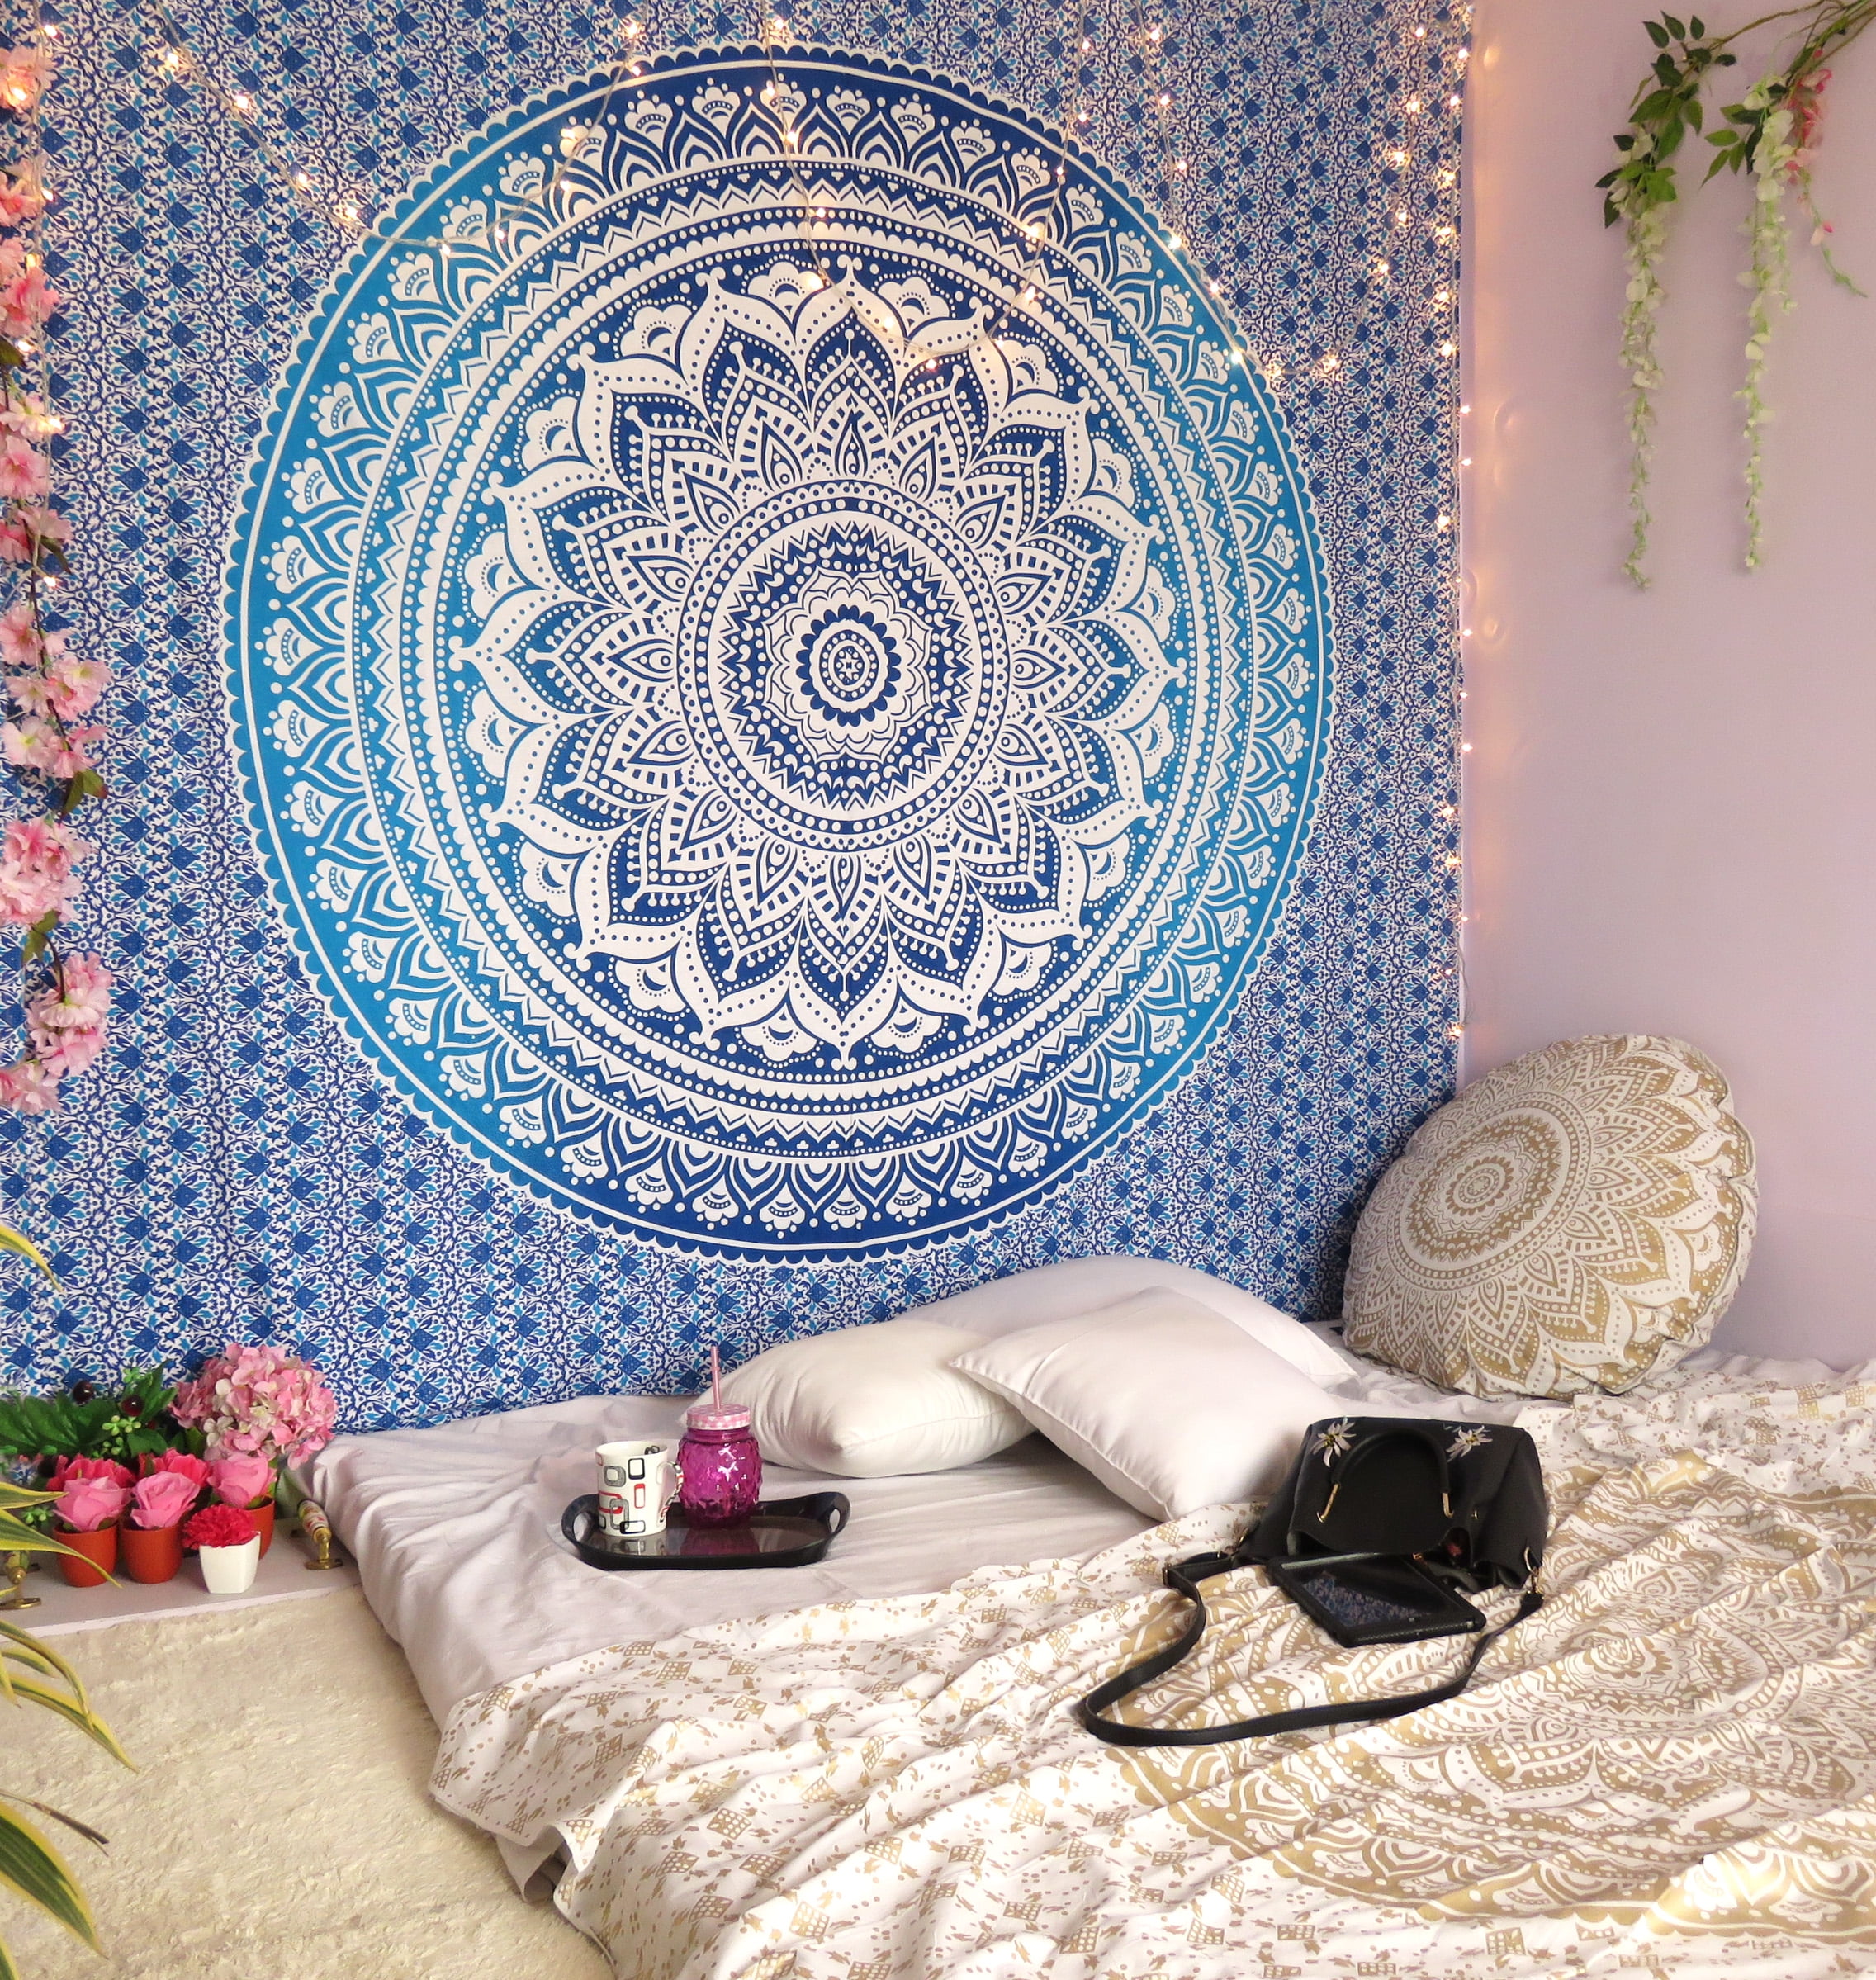 Indian Bedspread Blue Queen Elephants Cotton Wall hanging Boho India Throw Hippy 